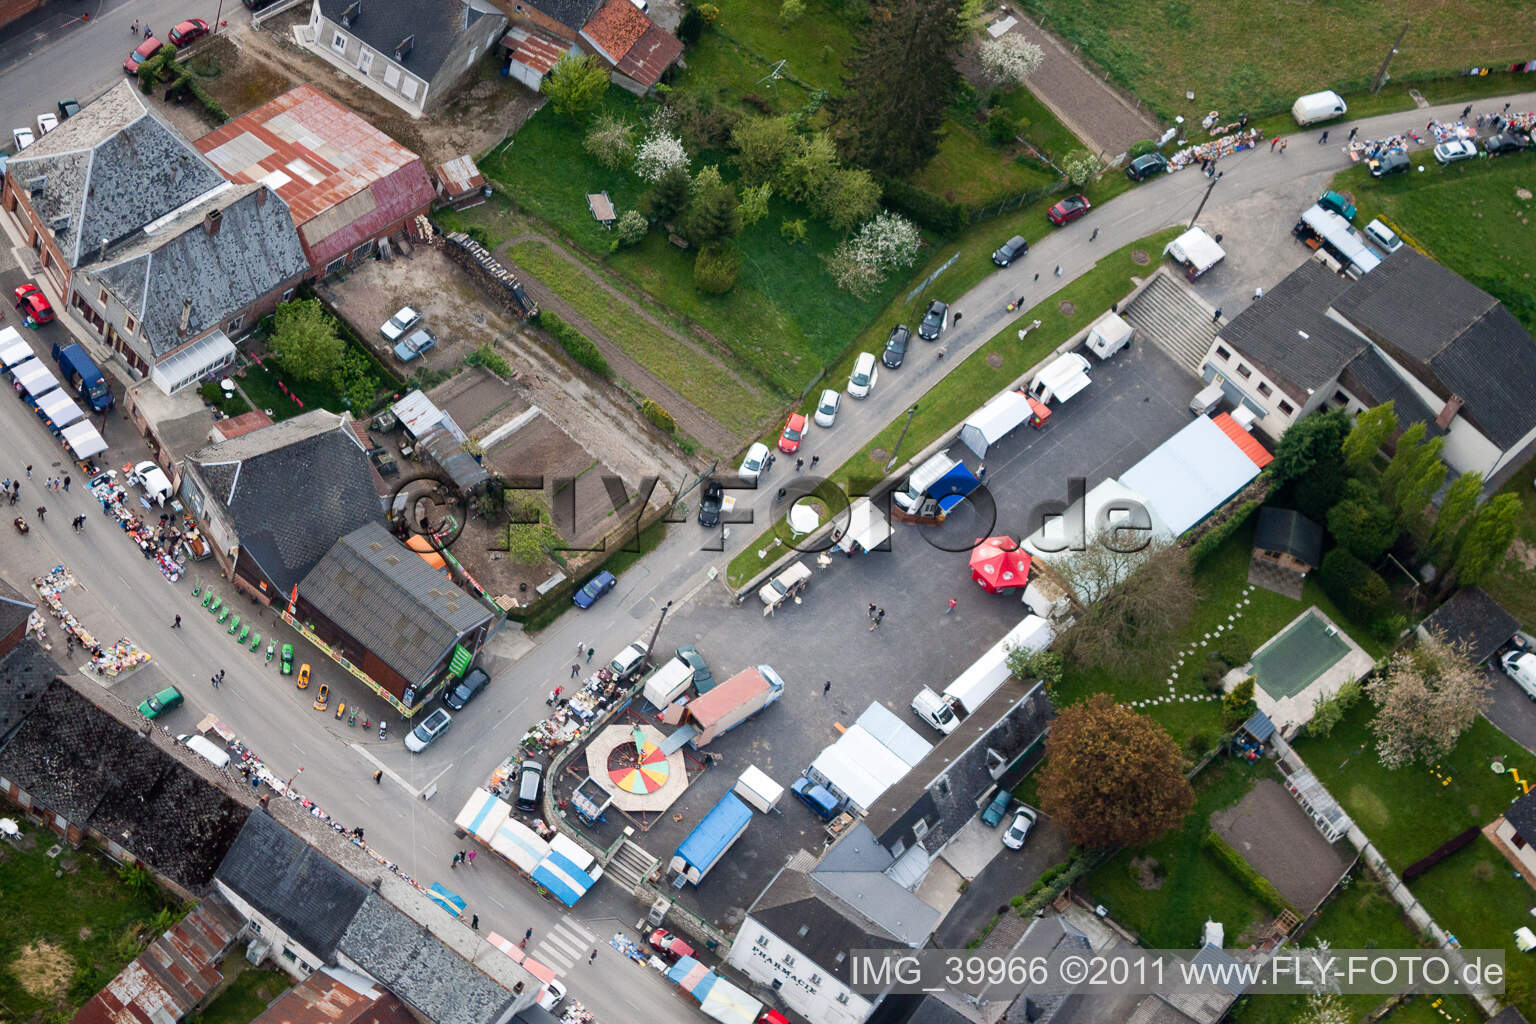 Sunday market in Marly-Gomont in the state Aisne, France